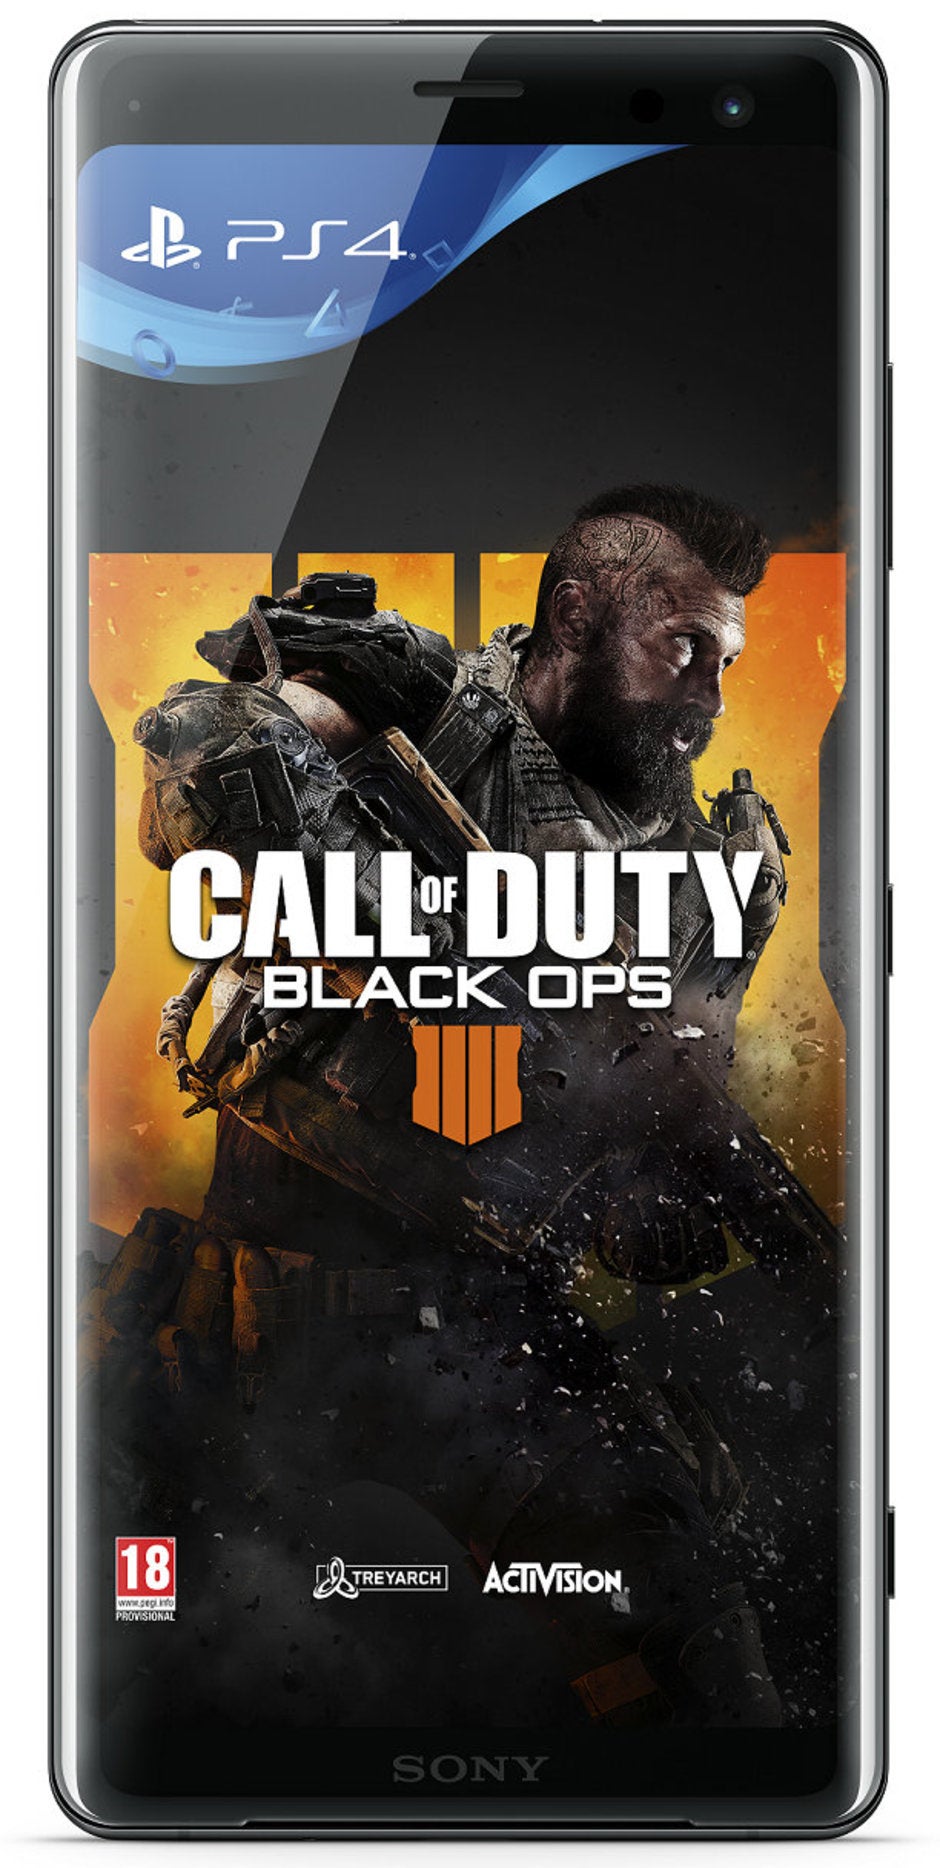 Sony Xperia XZ3 pre-orders in Europe come with a free copy of Call of Duty: Black Ops 4